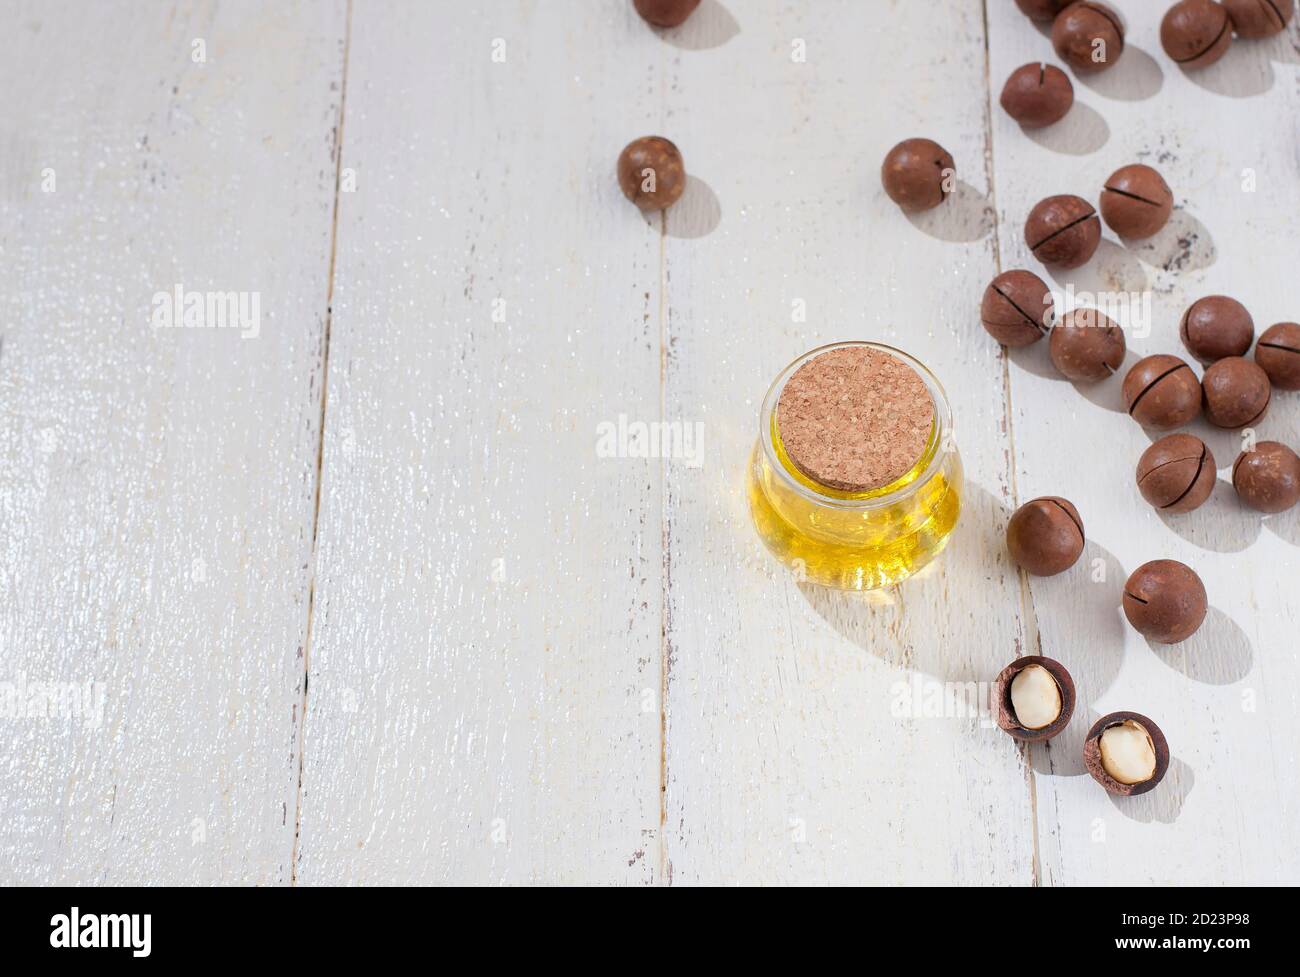 Natural macadamia oil and Macadamia nuts on wooden white board. Healthy product. Healthy food concept. Stock Photo